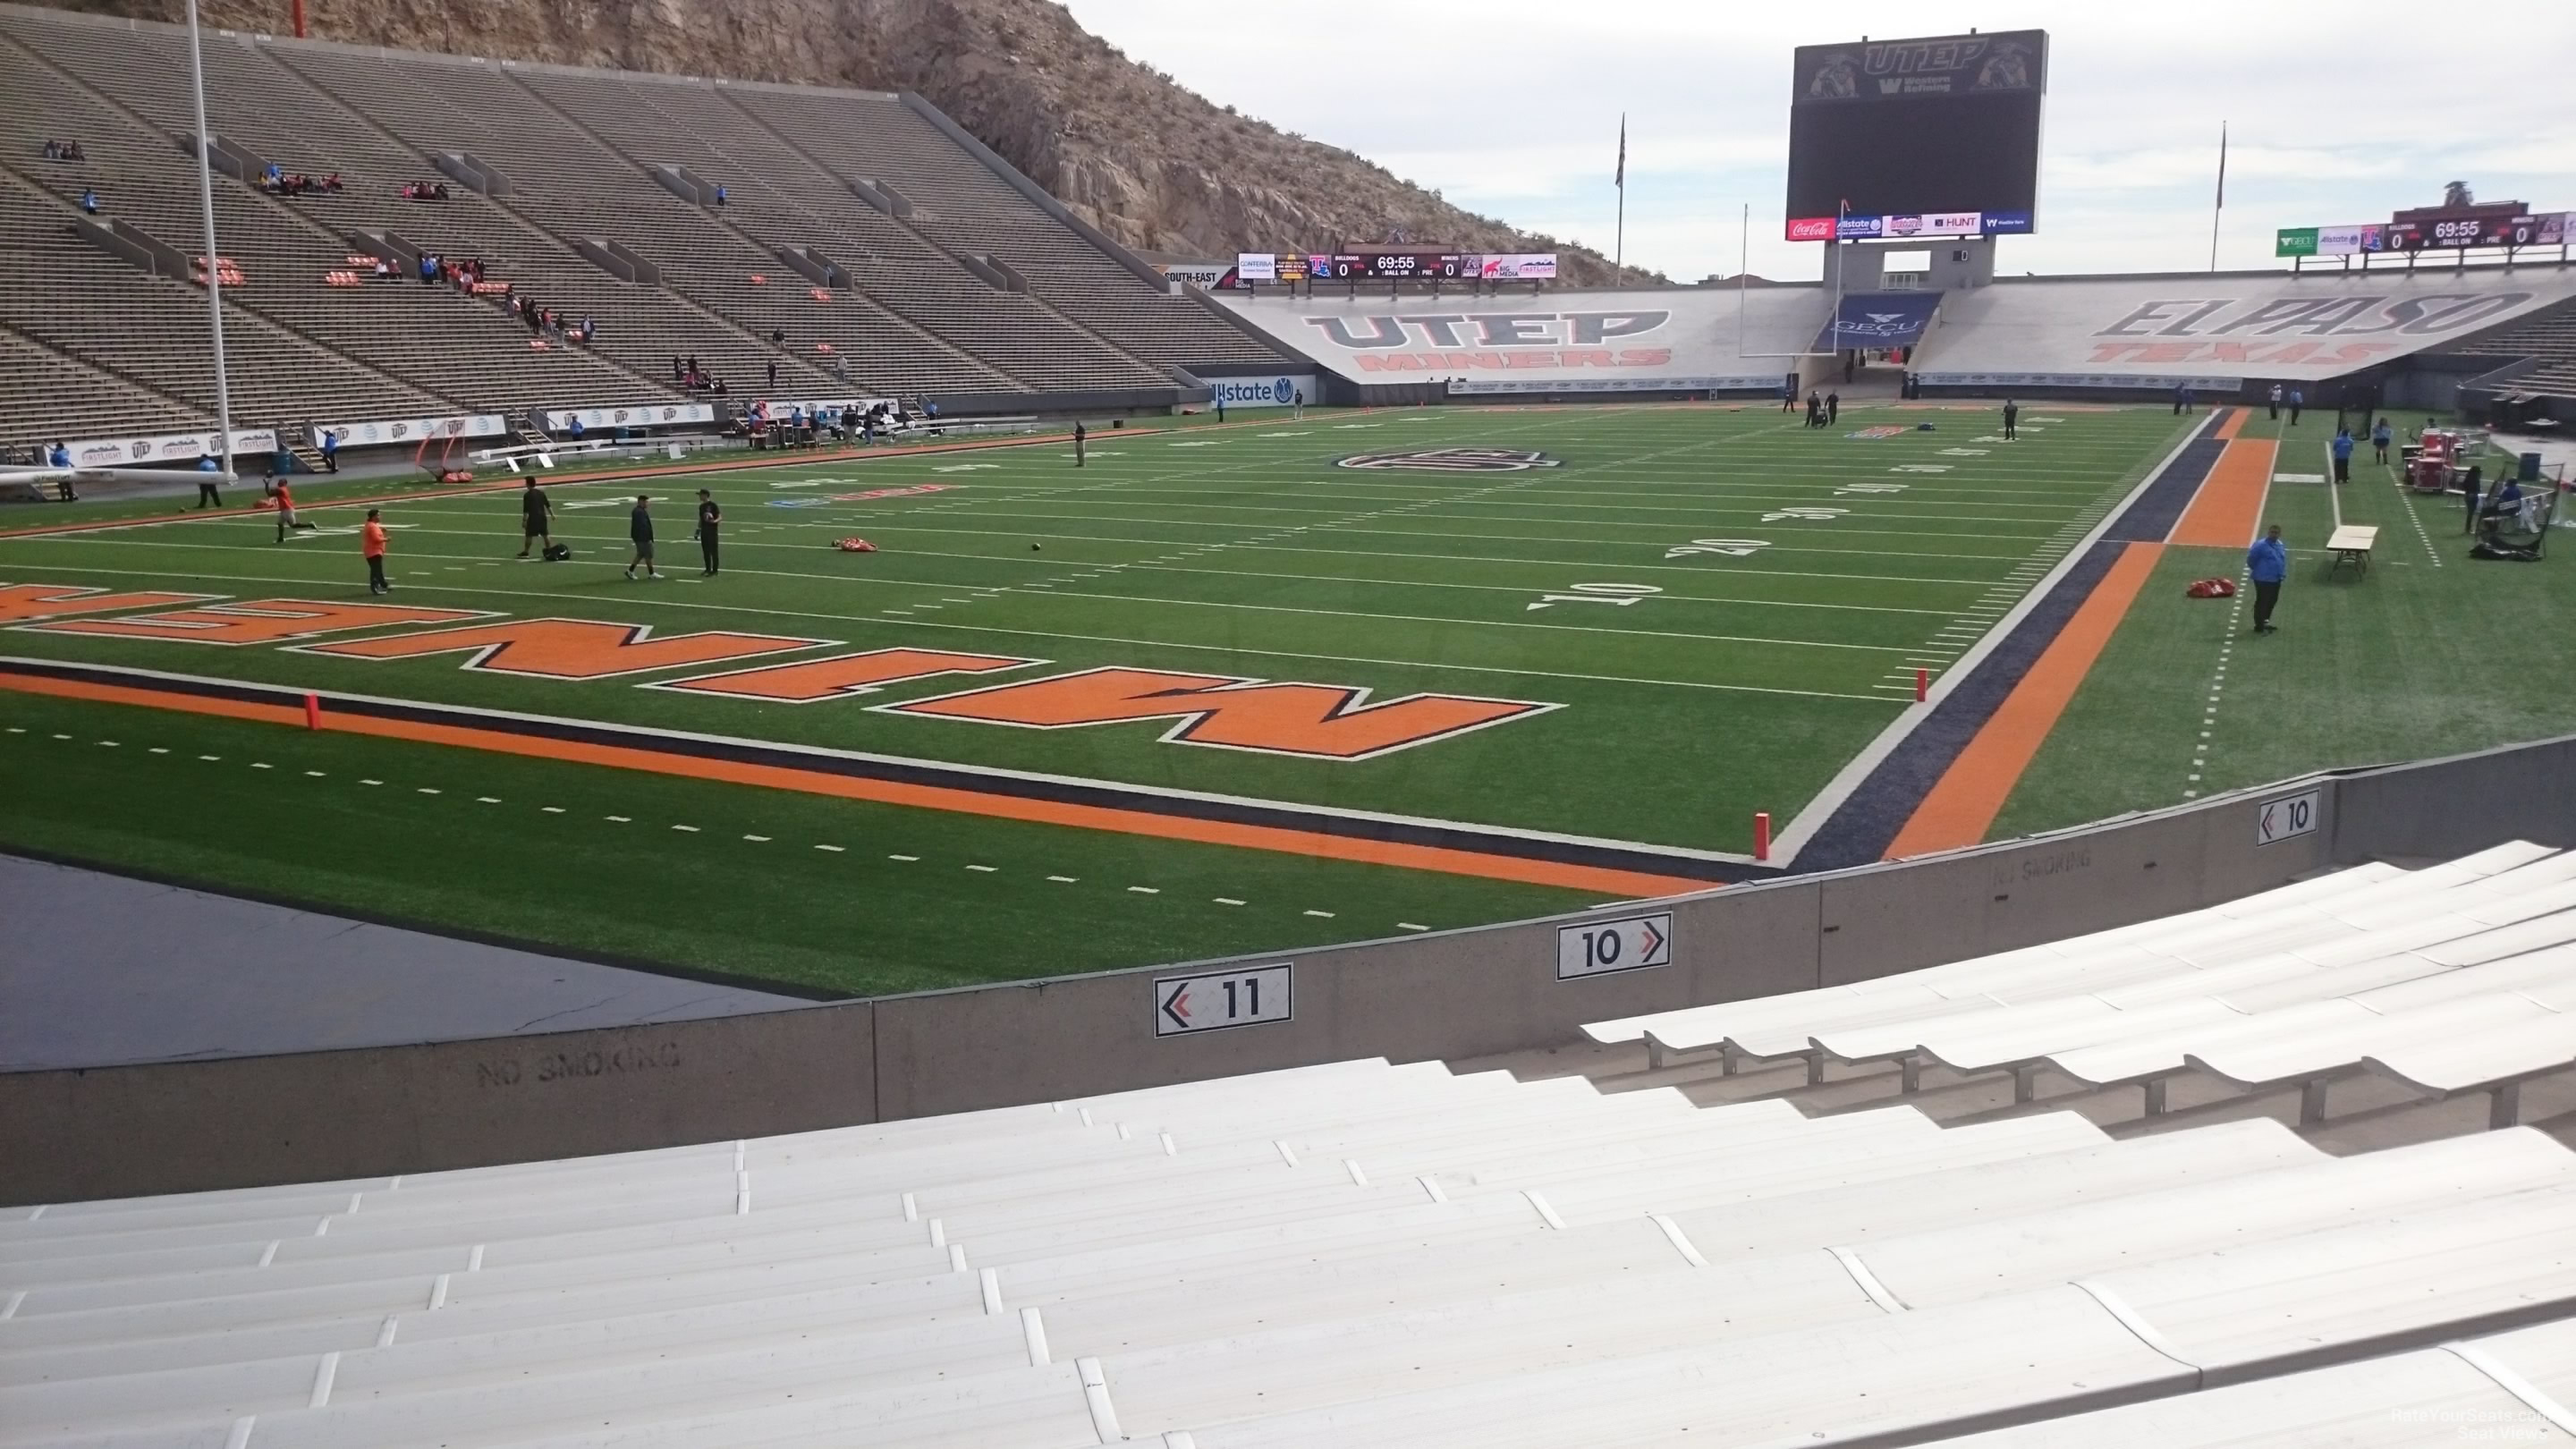 section 11, row 15 seat view  for football - sun bowl